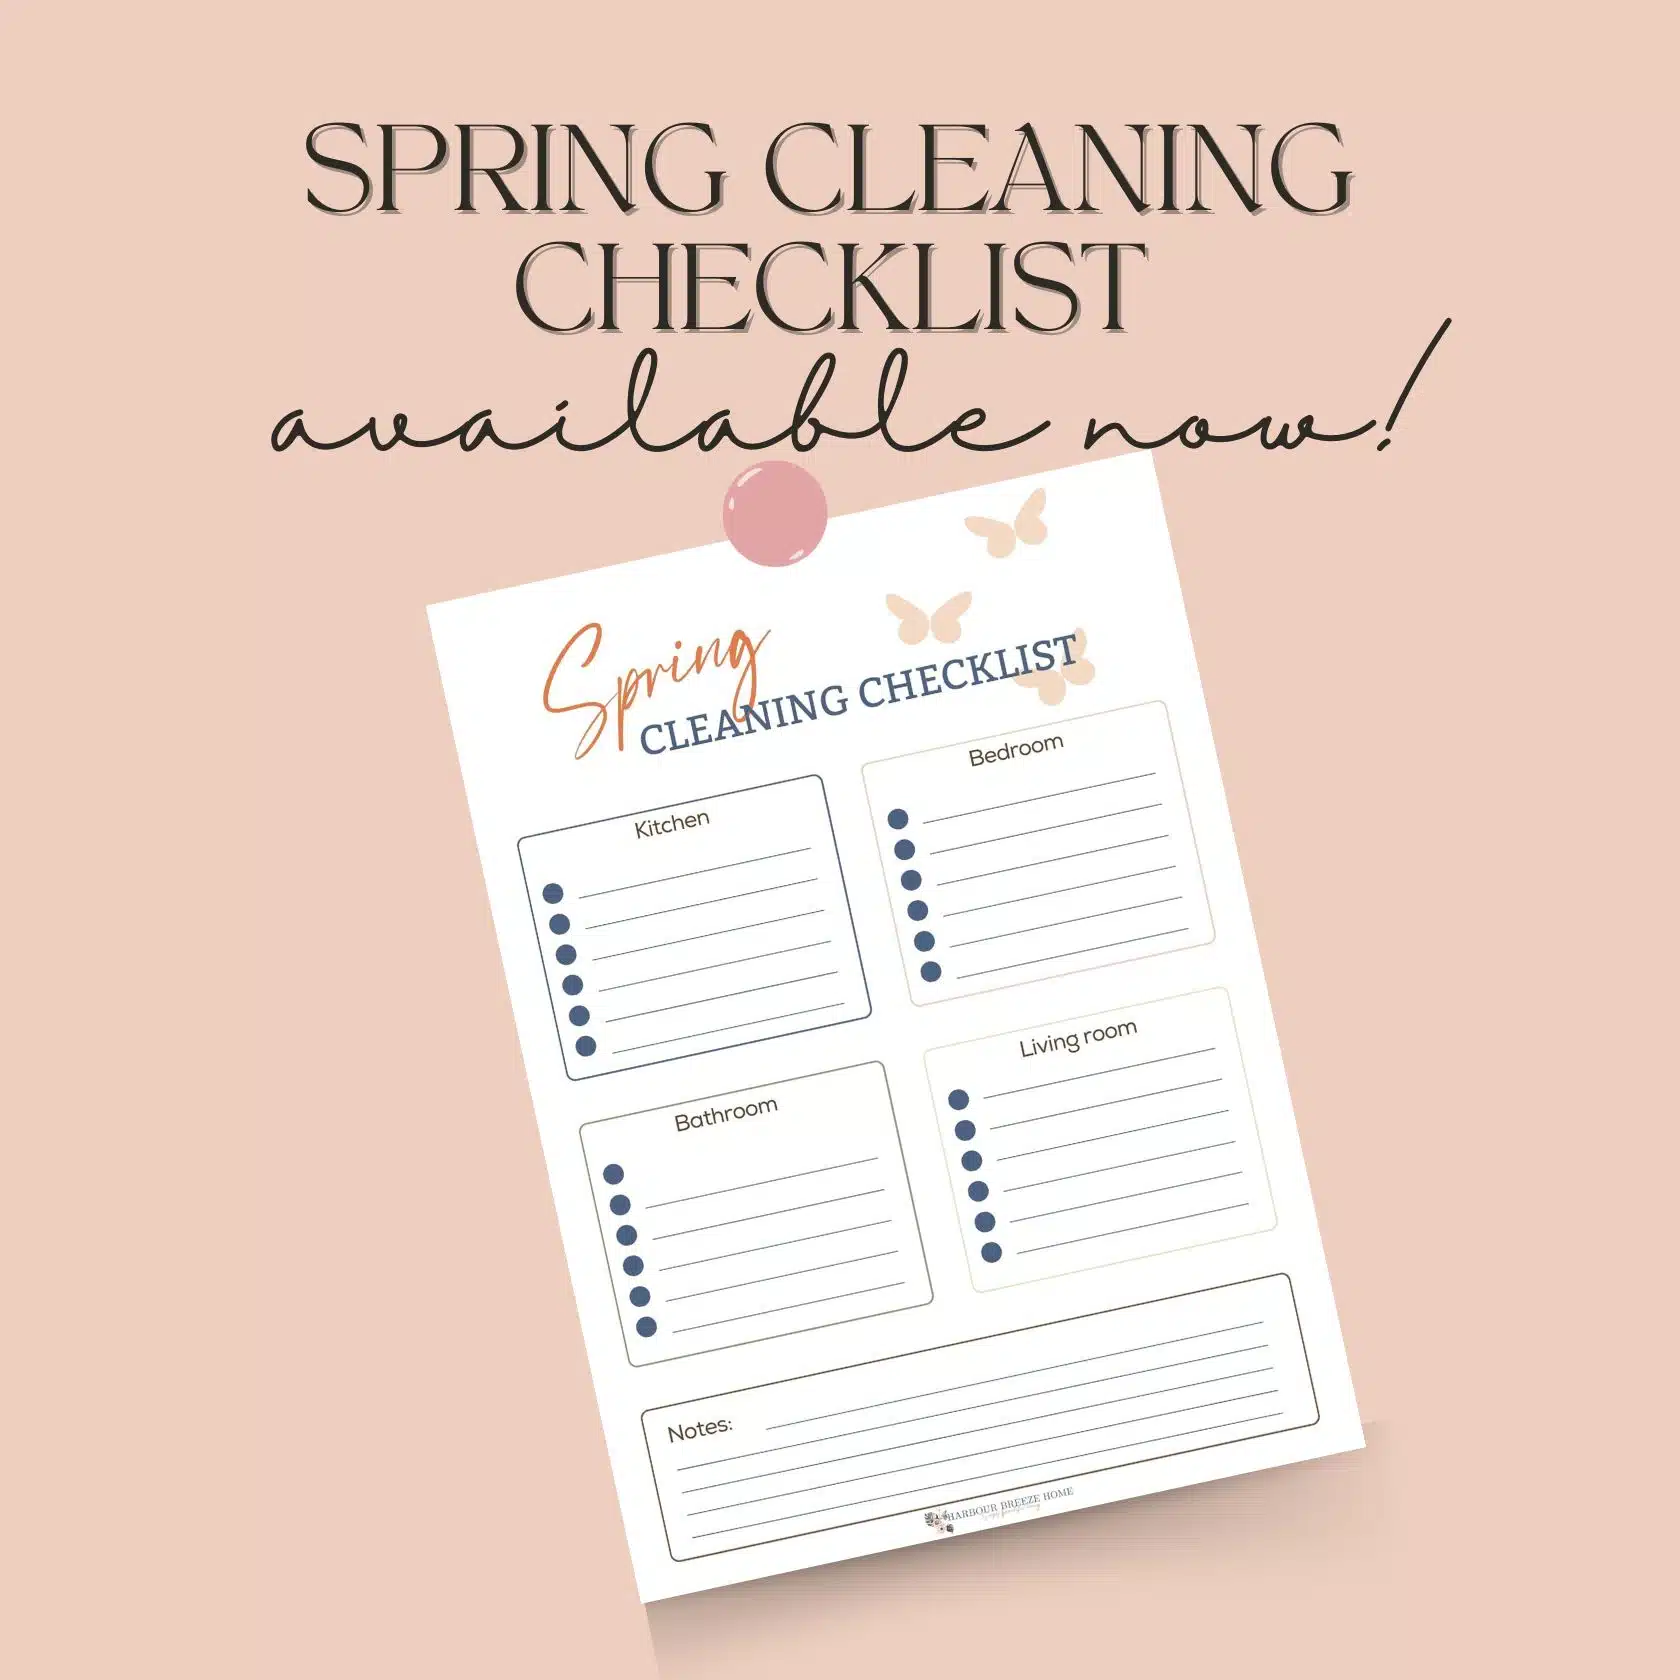 Spring Cleaning Hacks + Spring Cleaning Checklist to Save You Time and Effort